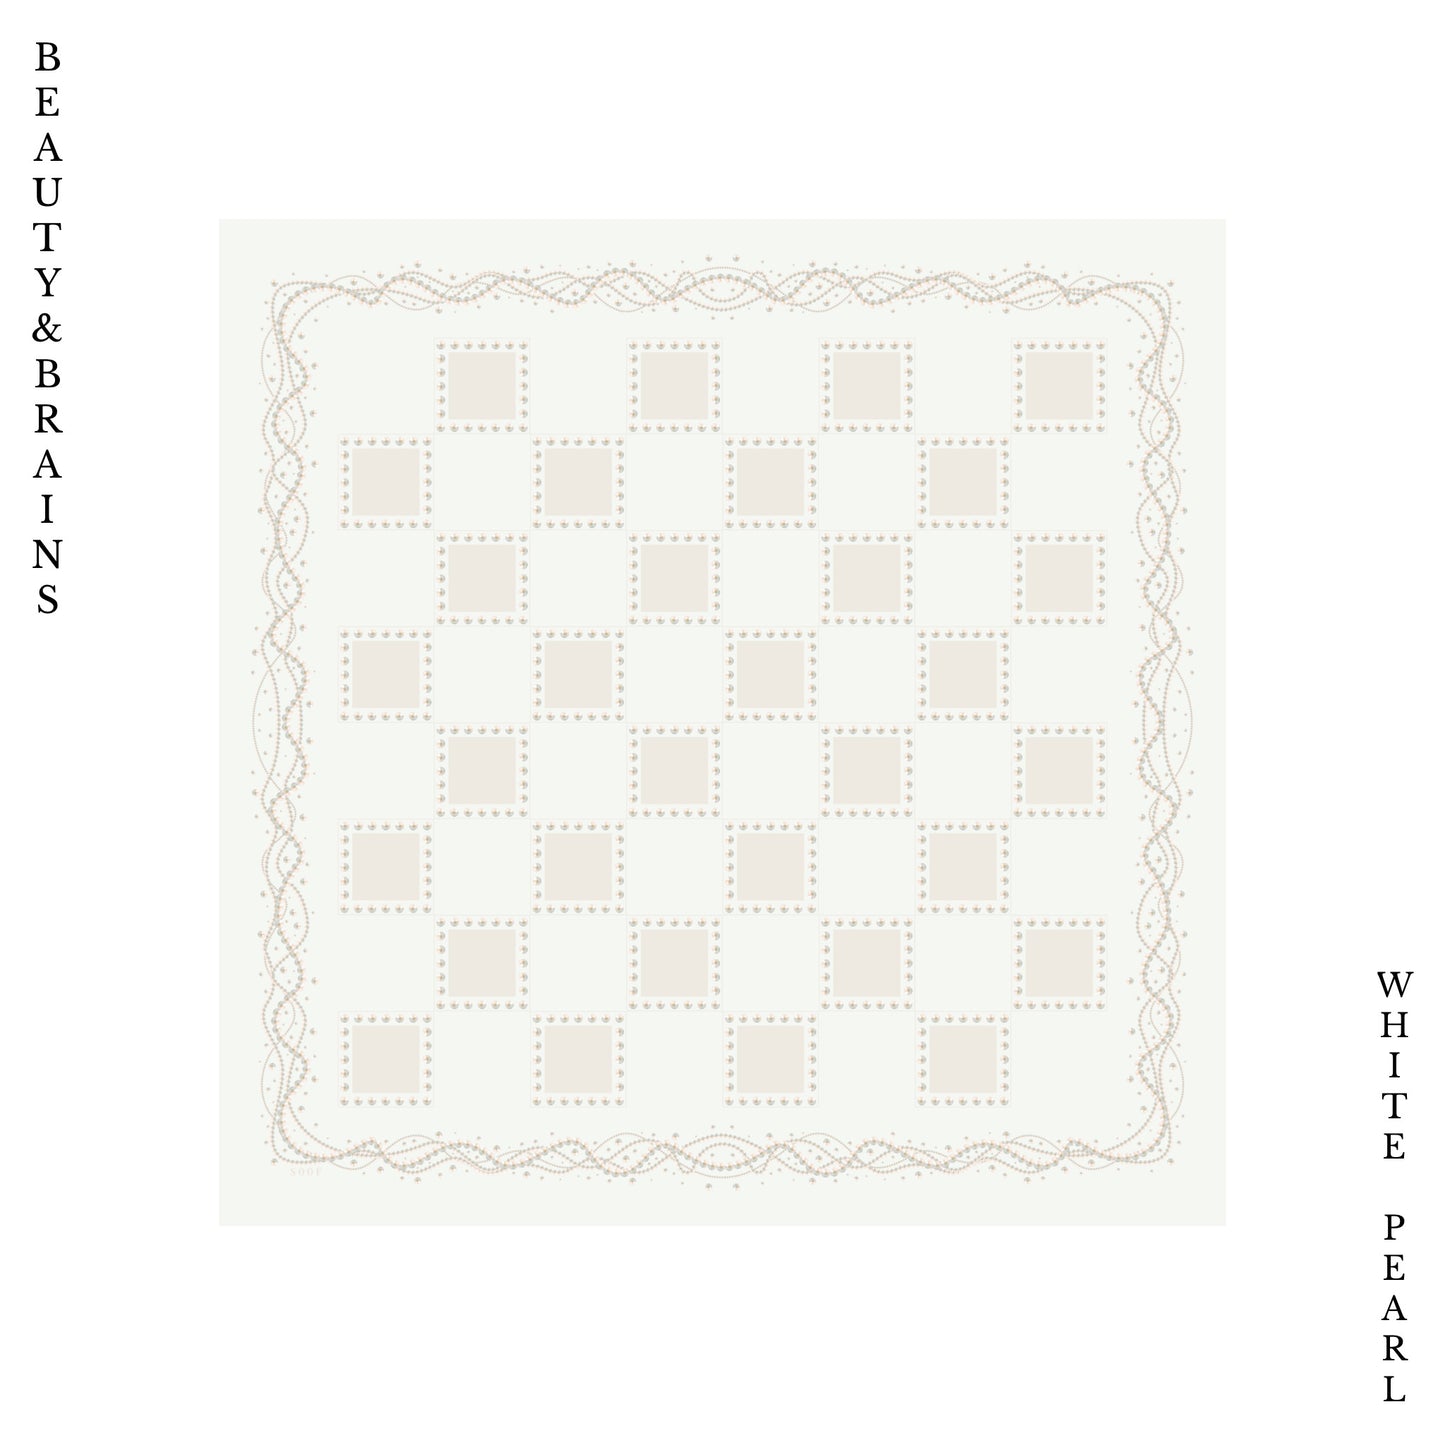 Beauty & Brains in White Pearl (Square)